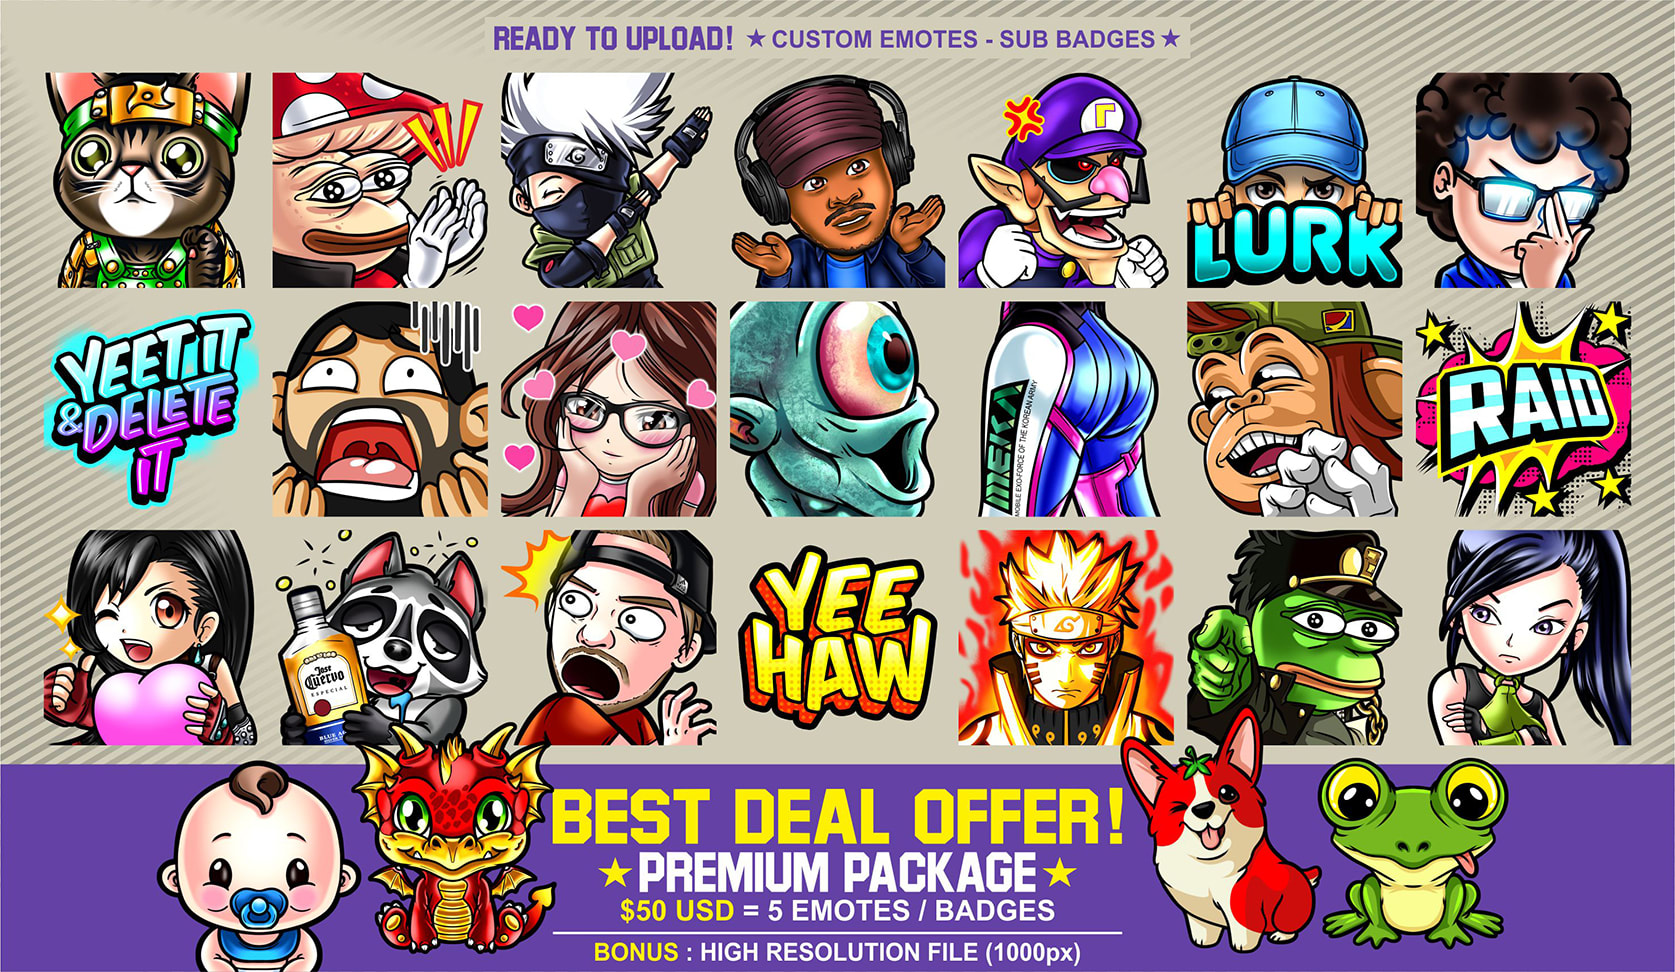 Create Premium Twitch Emotes Or Sub Badges In My Styles By Aces Go Fiverr